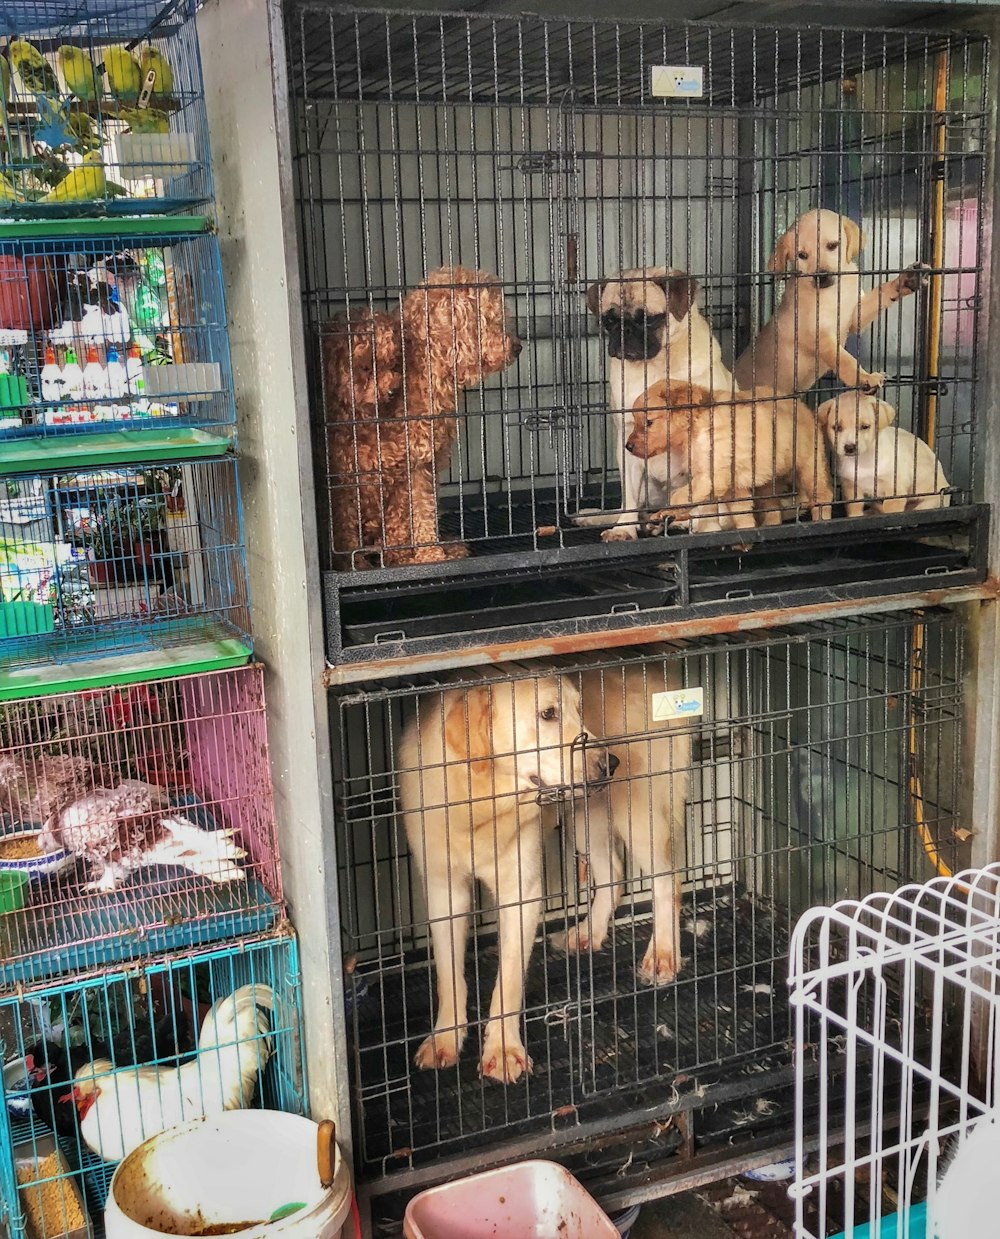 a group of dogs sitting inside of cages